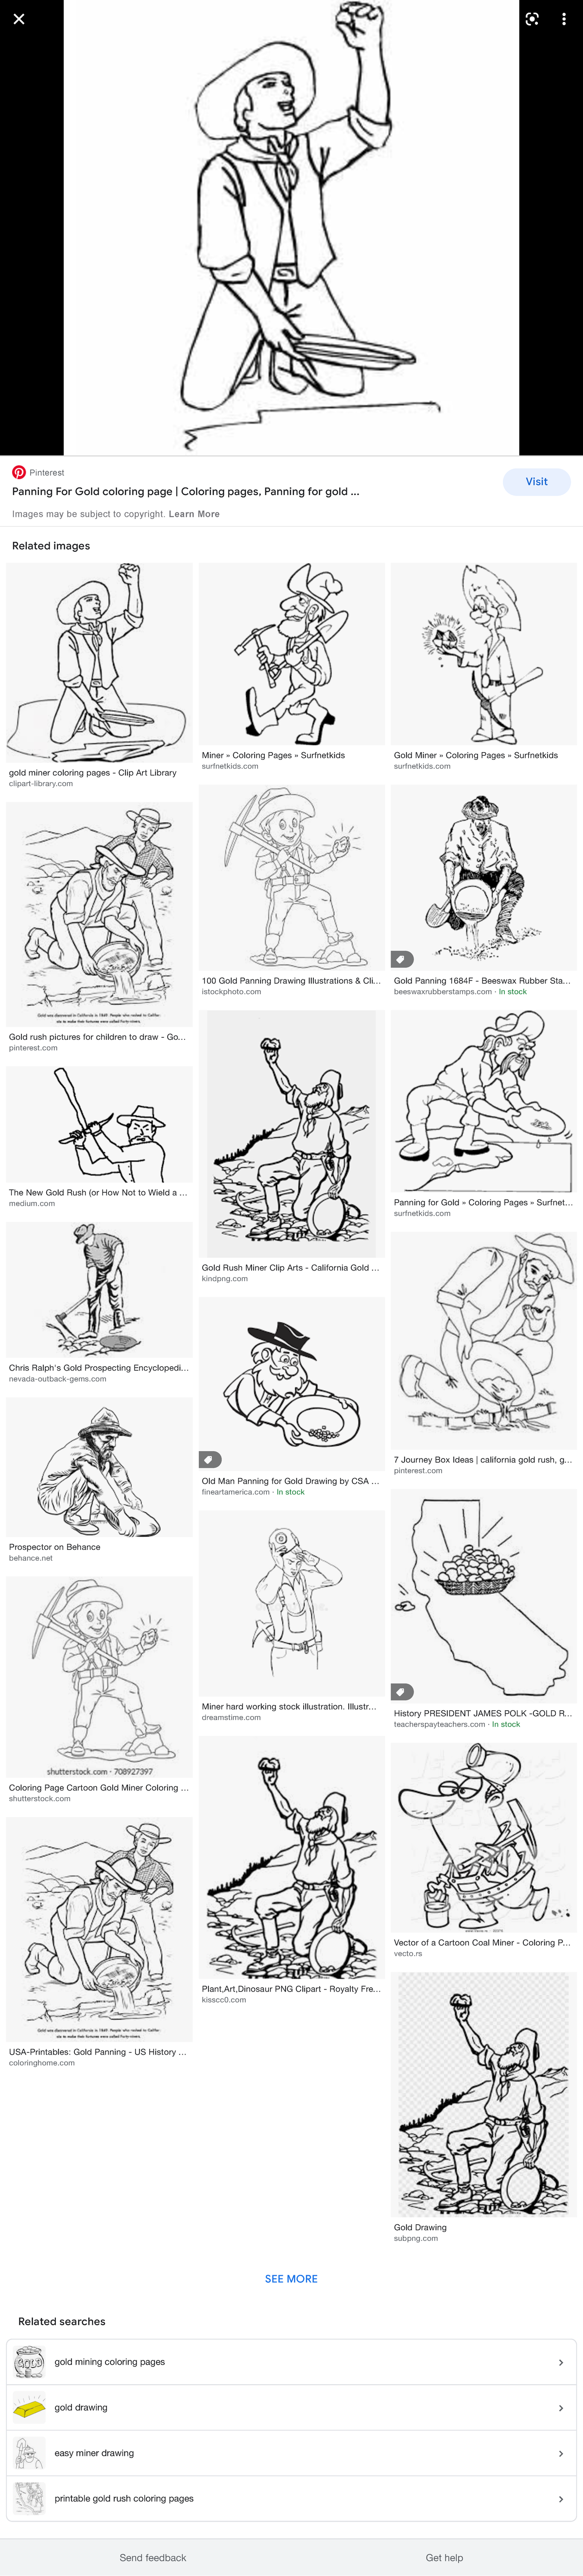 How to Draw Coal Miner - Miner Worker Step by Step - YouTube